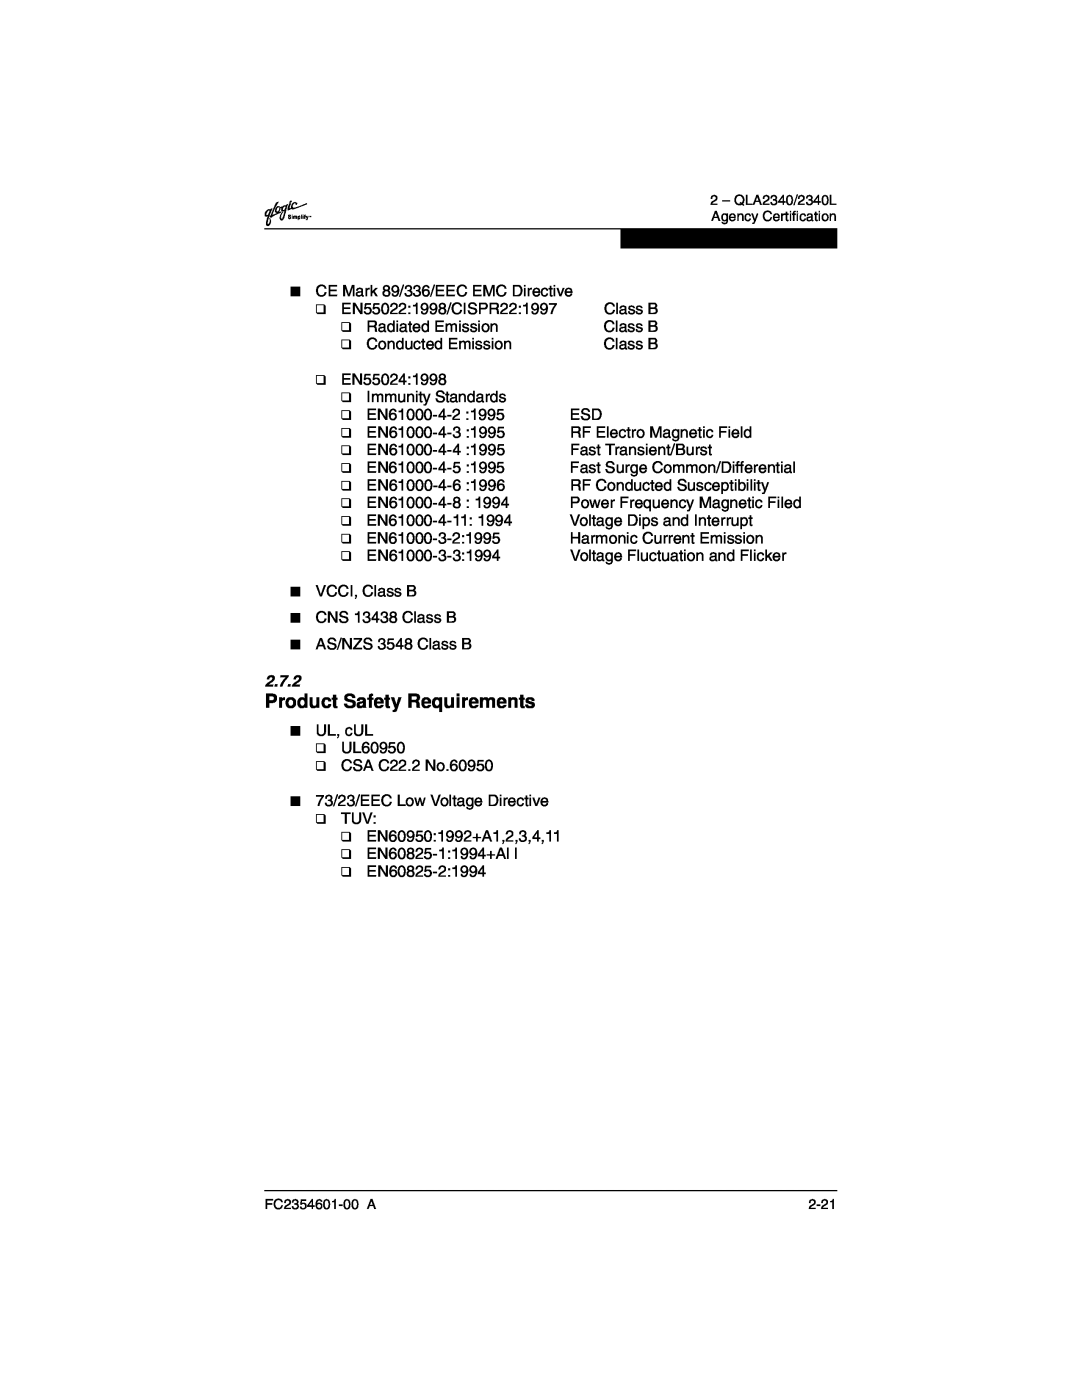 Q-Logic 2300 manual Product Safety Requirements, 2.7.2 